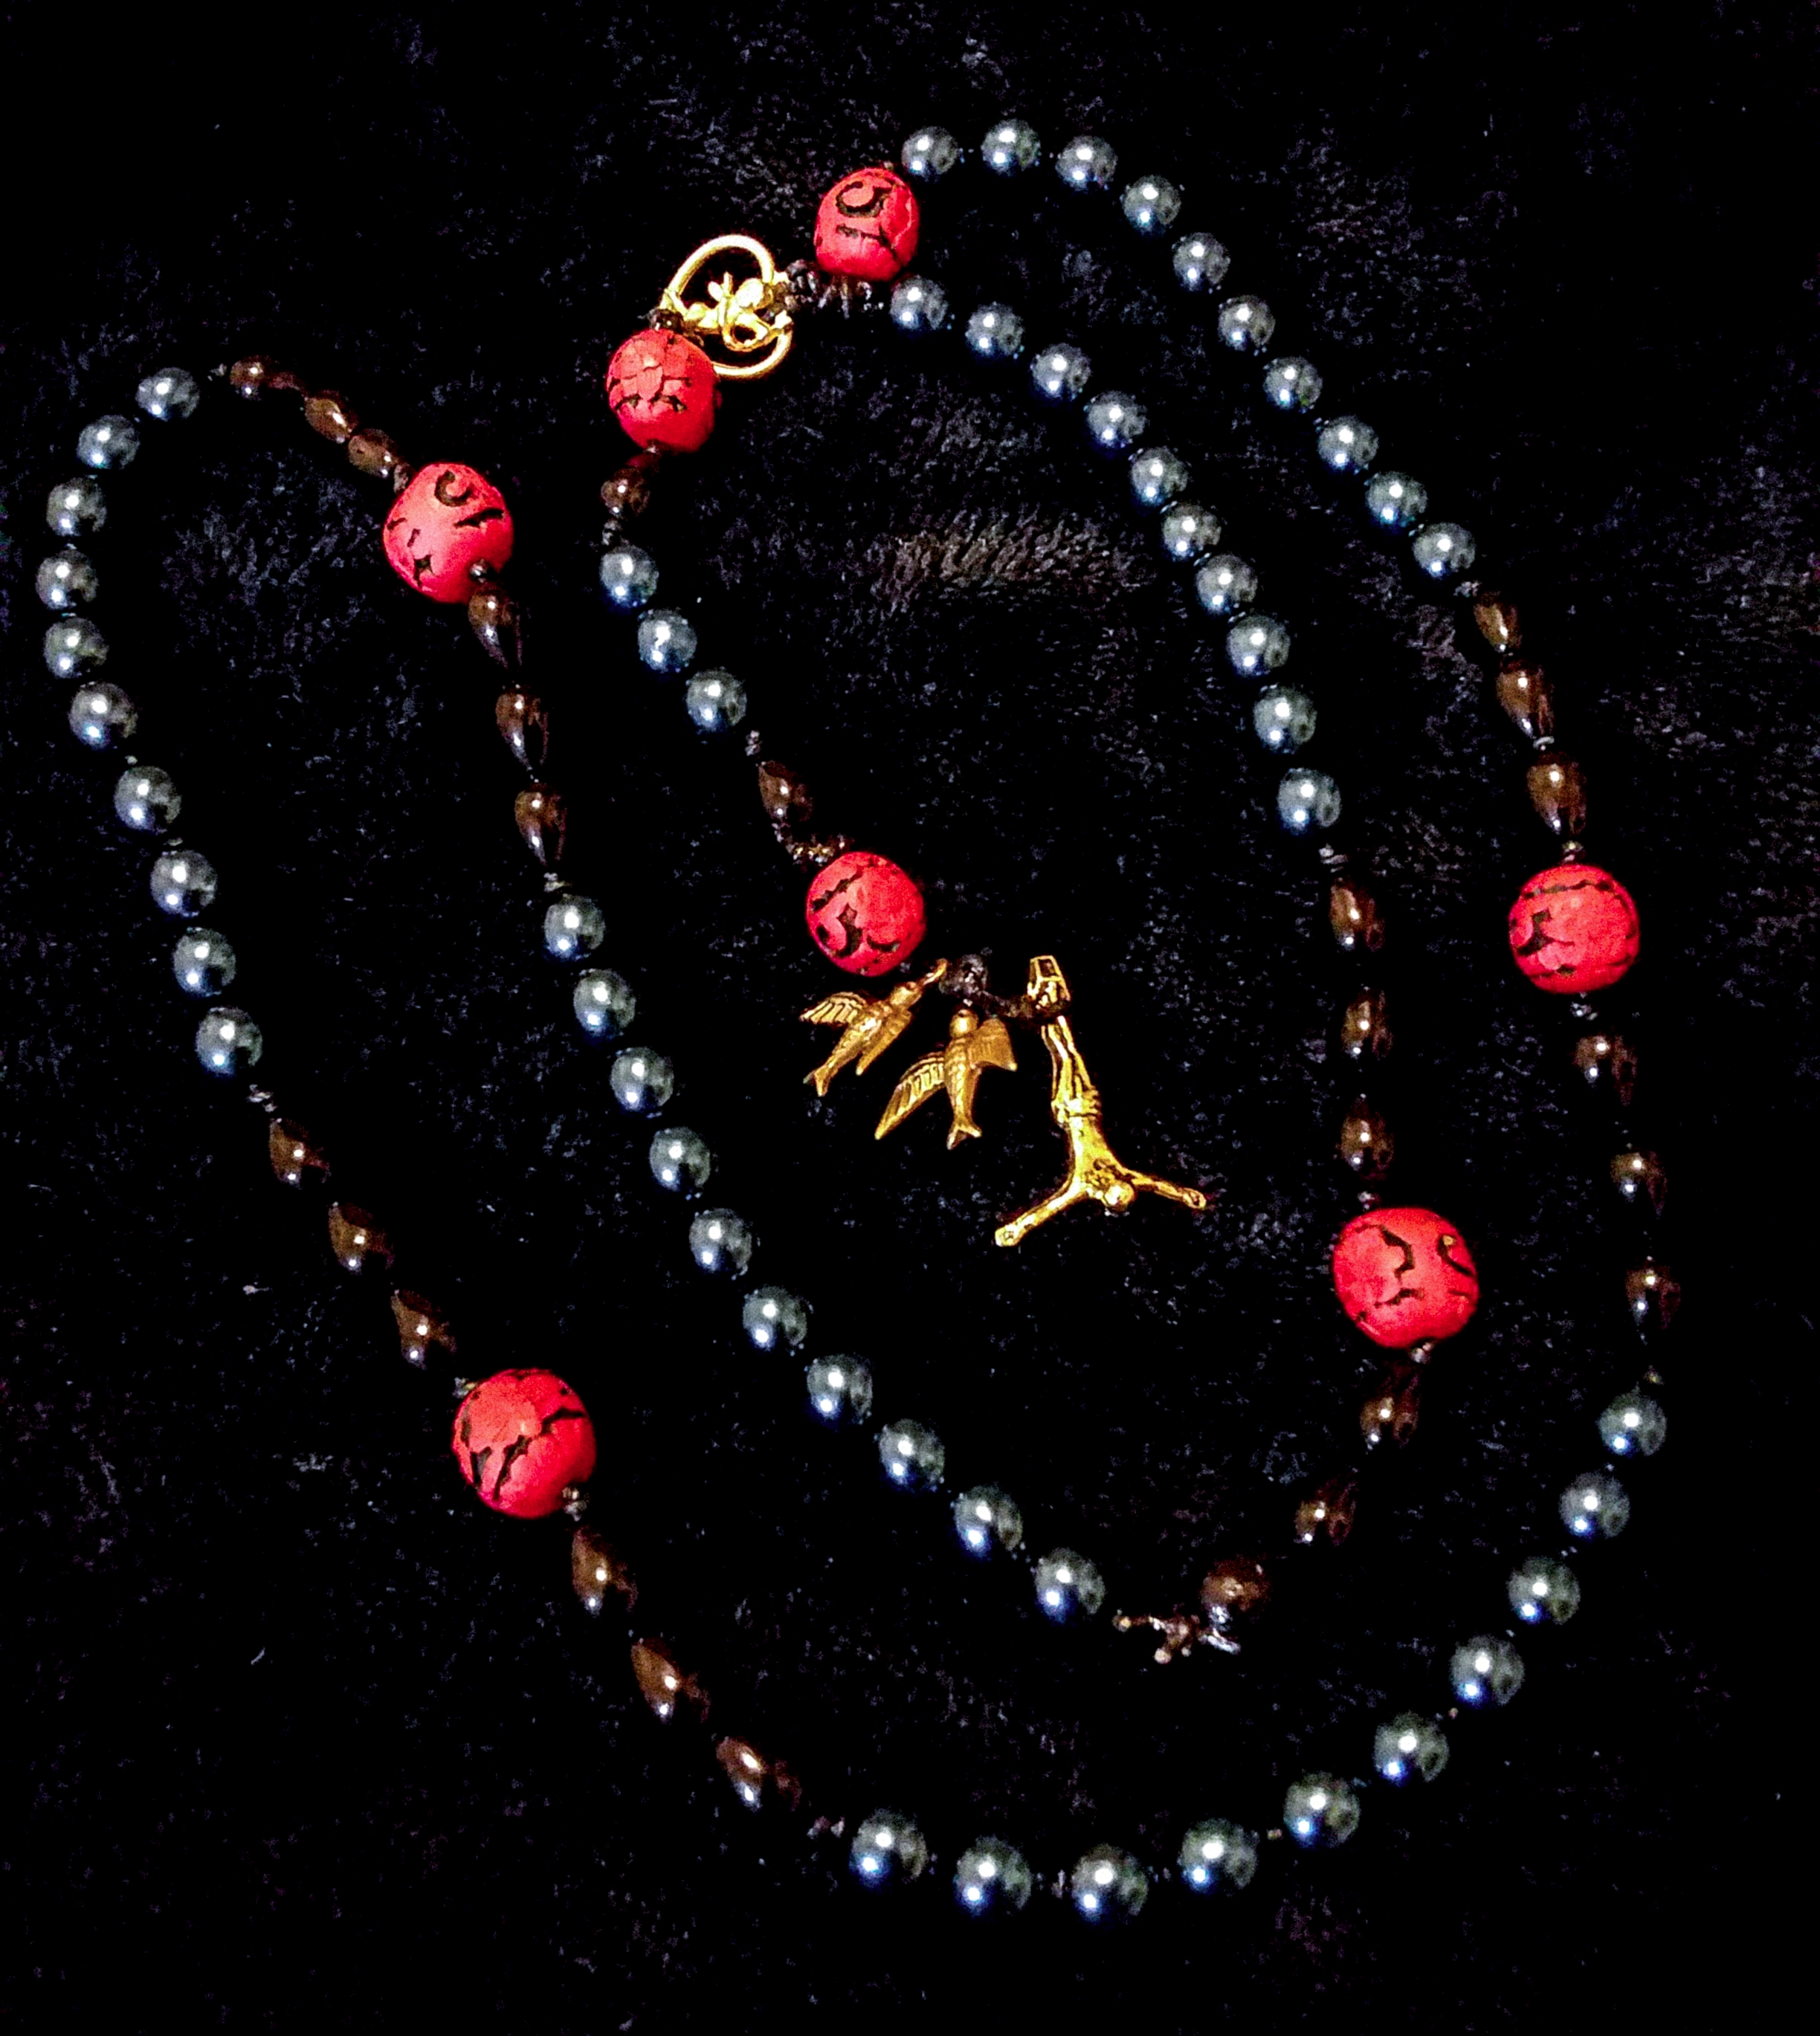 my judas rosary. at the end is an inverted crucifix paired with two sparrow shaped beads. the 'hail holy queen' bead is in the shape of cupid inside a heart. the 'hail mary' beads are all blue pearls, and the 'our father' beads are red with flowers carved into them. these are spaced out with additional black teardrop shaped beads.